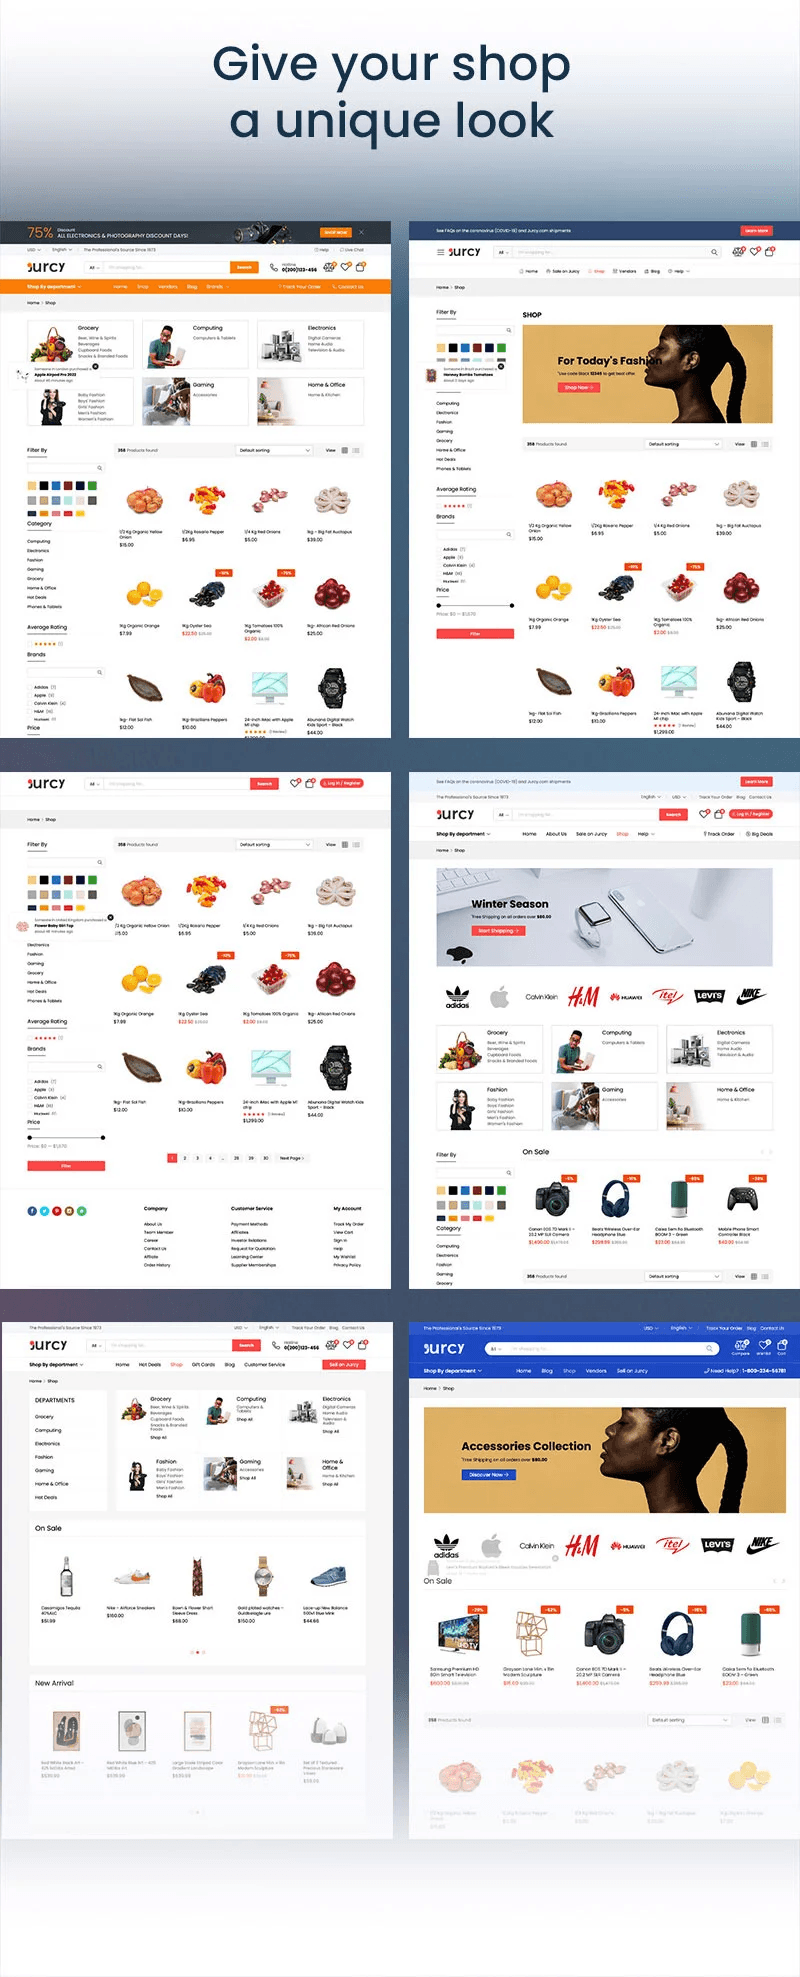 Great store product image pages.